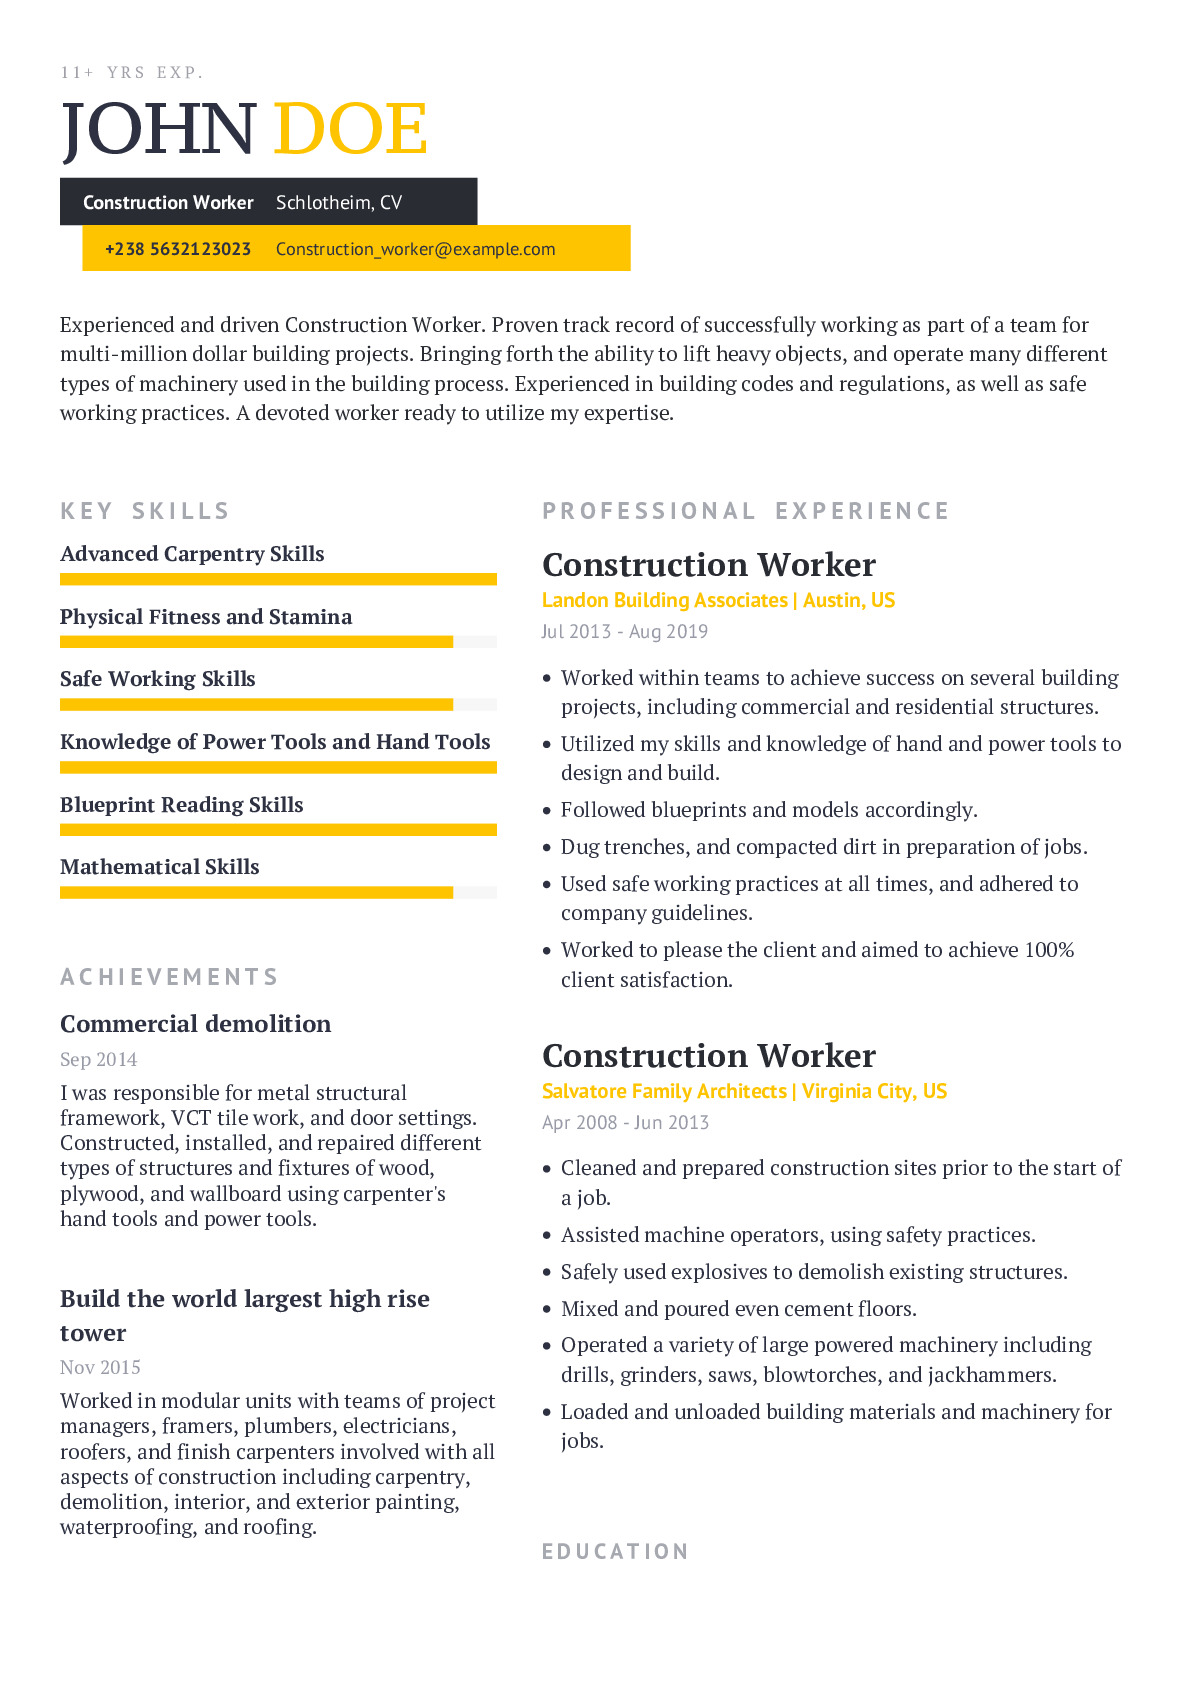 construction-worker-resume-example-with-content-sample-craftmycv